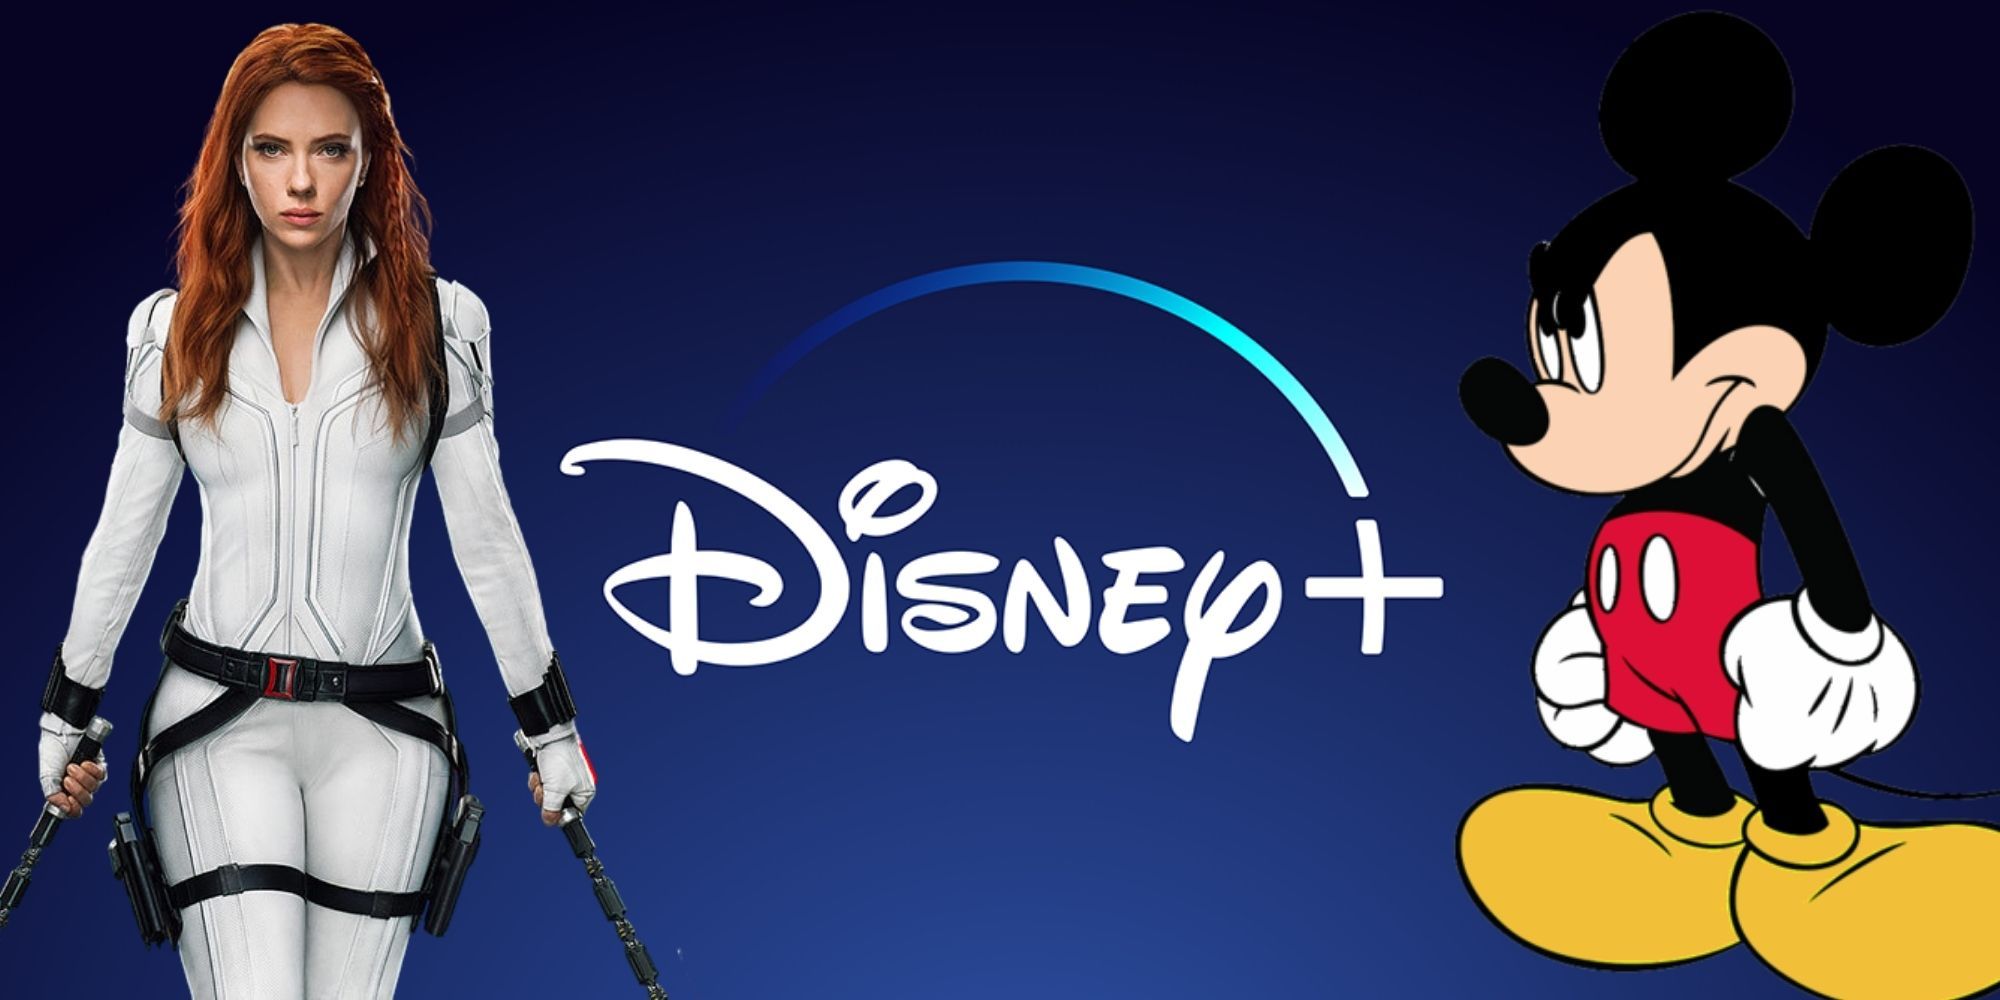 The Disney+ logo with Black Widow and Mickey Mouse on either side